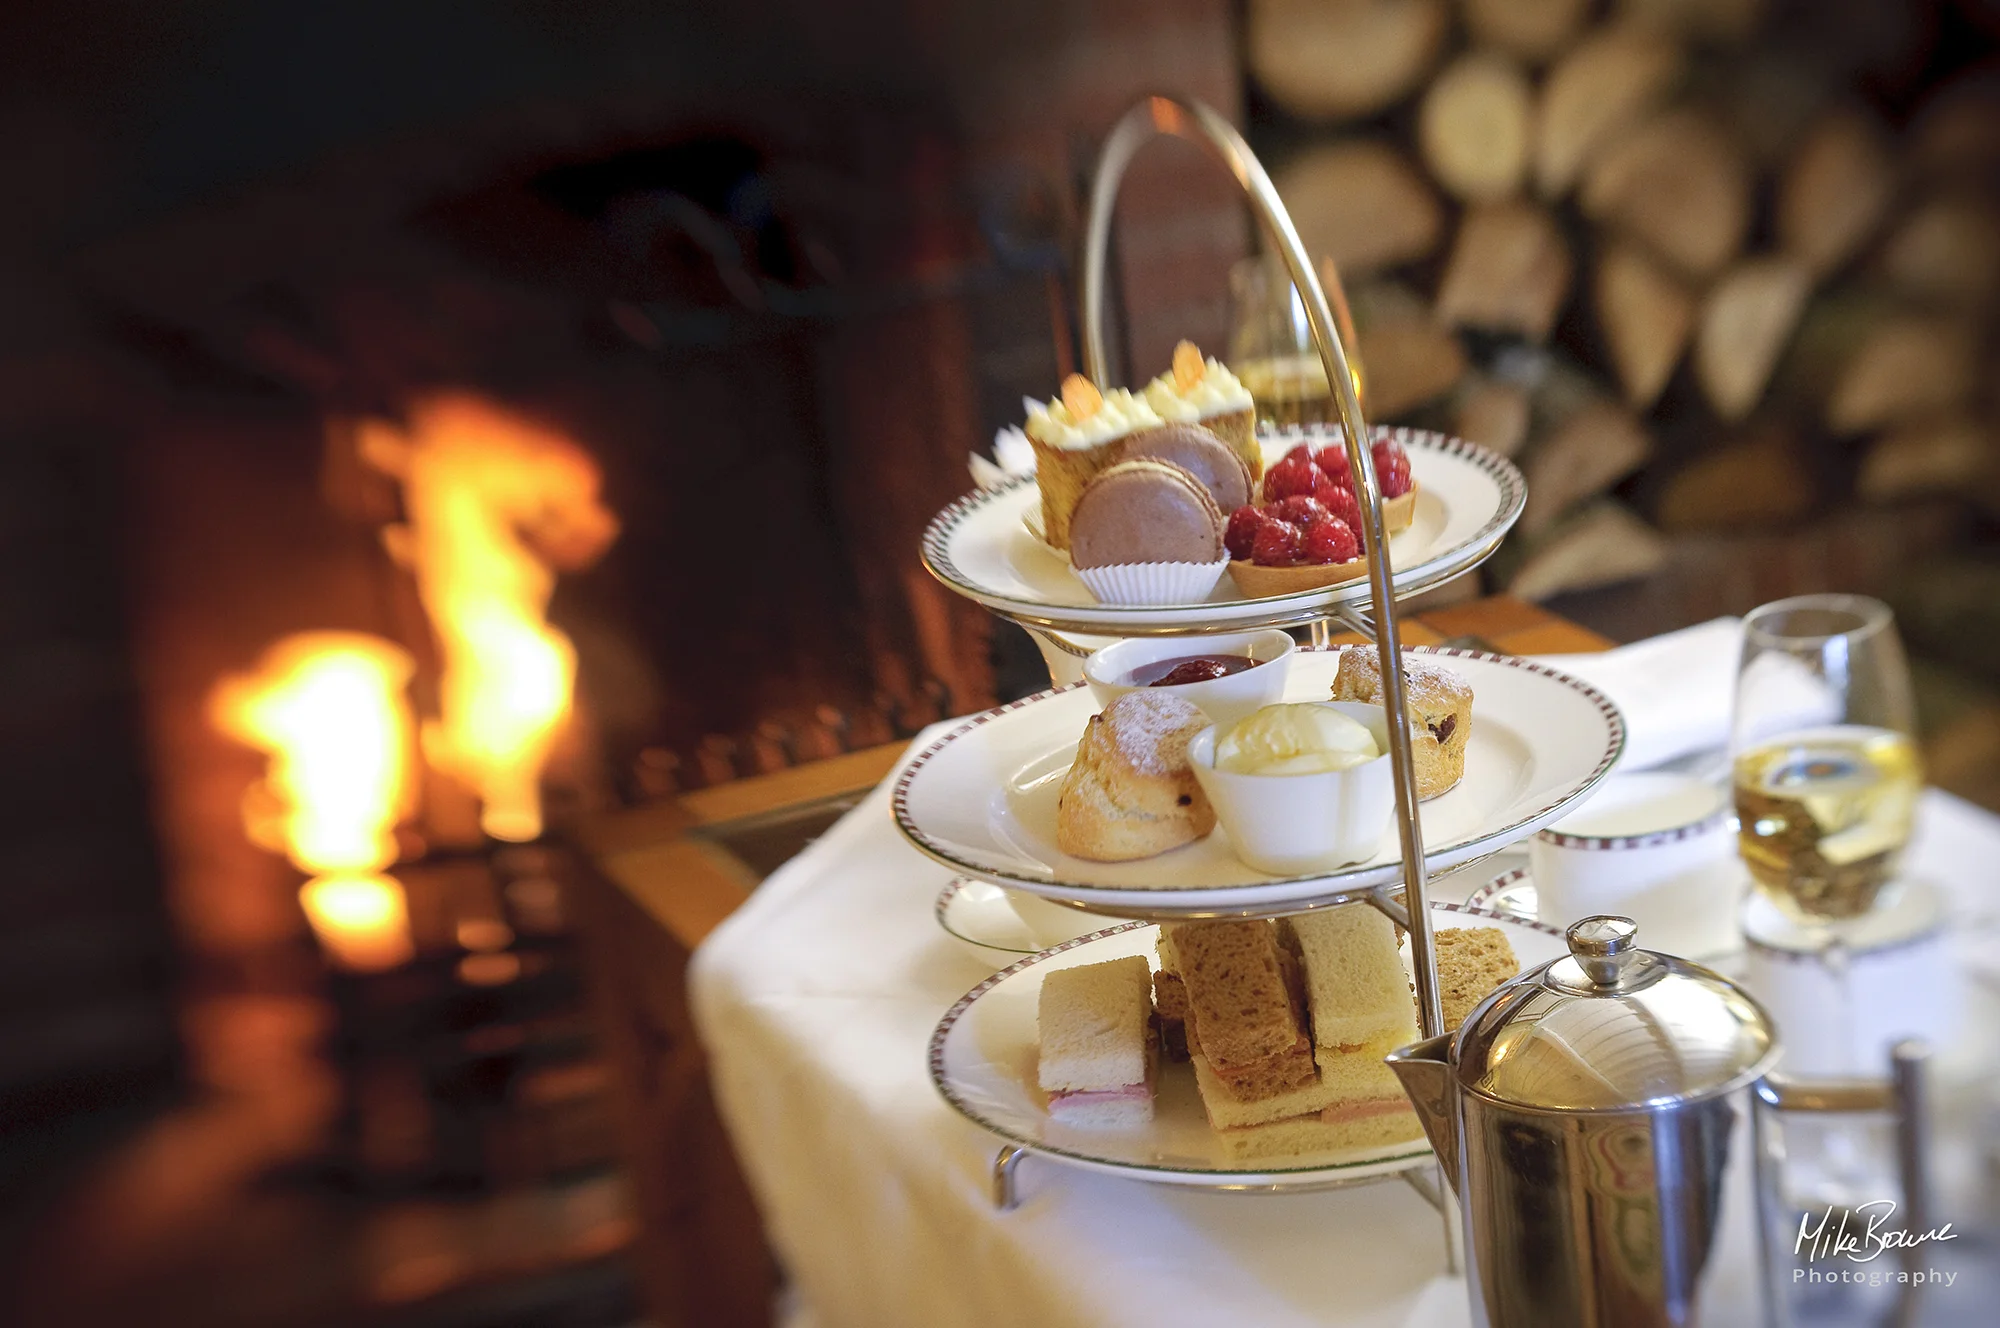 Classic English afternoon tea of sandwiches, cakes, scones and jam with cream and pot of tea next to log fire